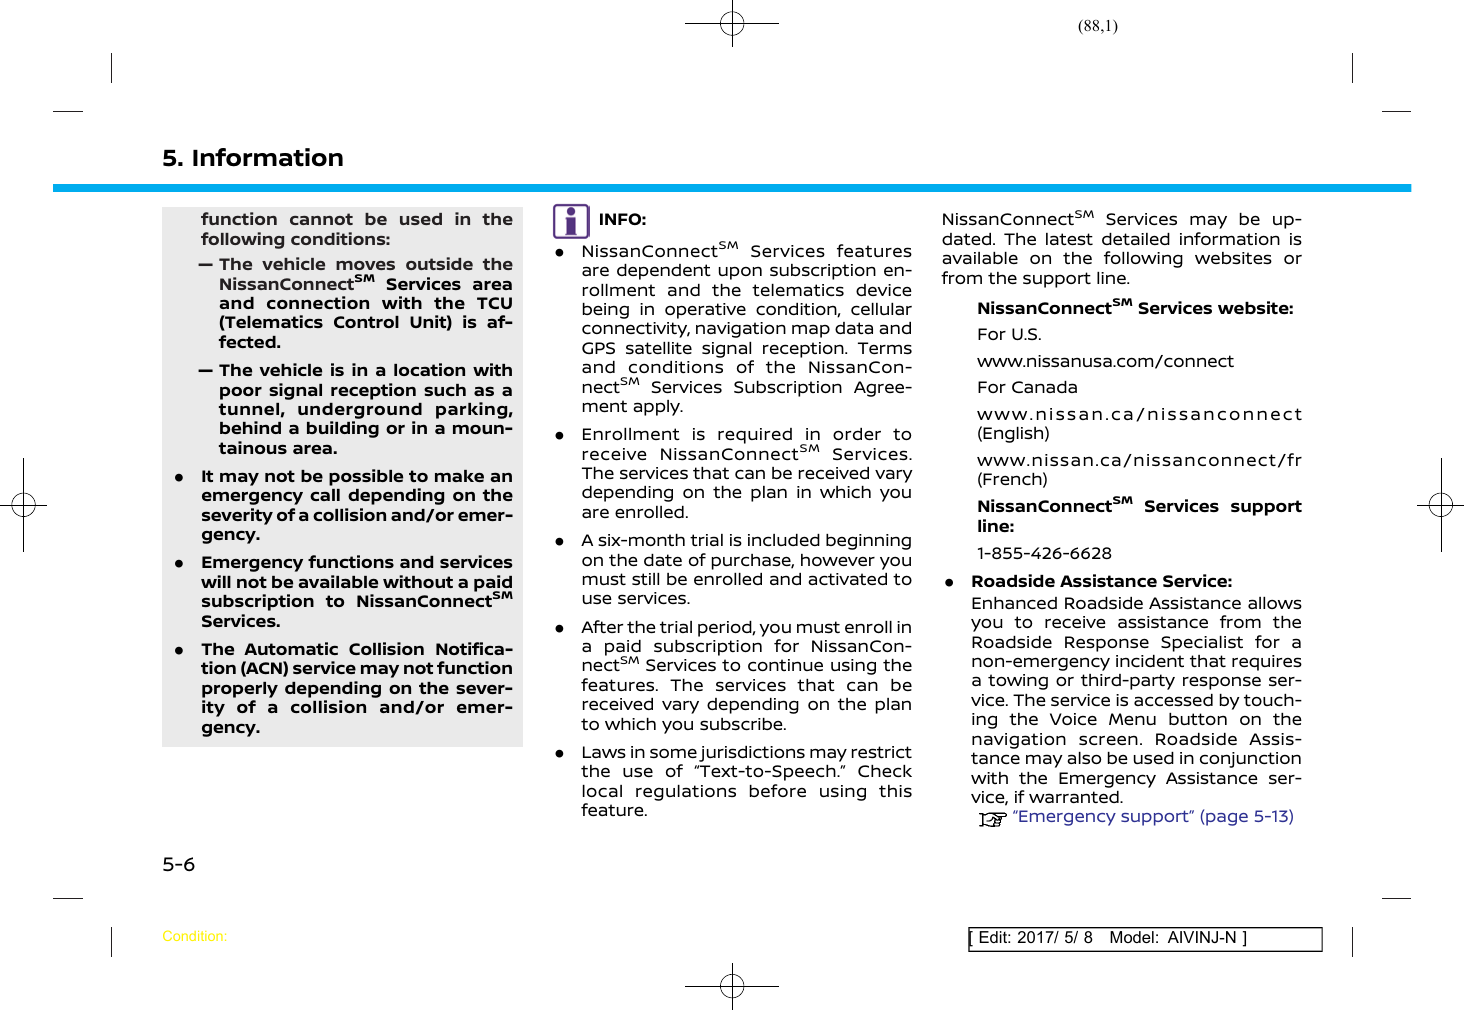 Page 88 of Robert Bosch Car Multimedia AIVICMFB0 Navigation System with Bluetooth and WLAN User Manual